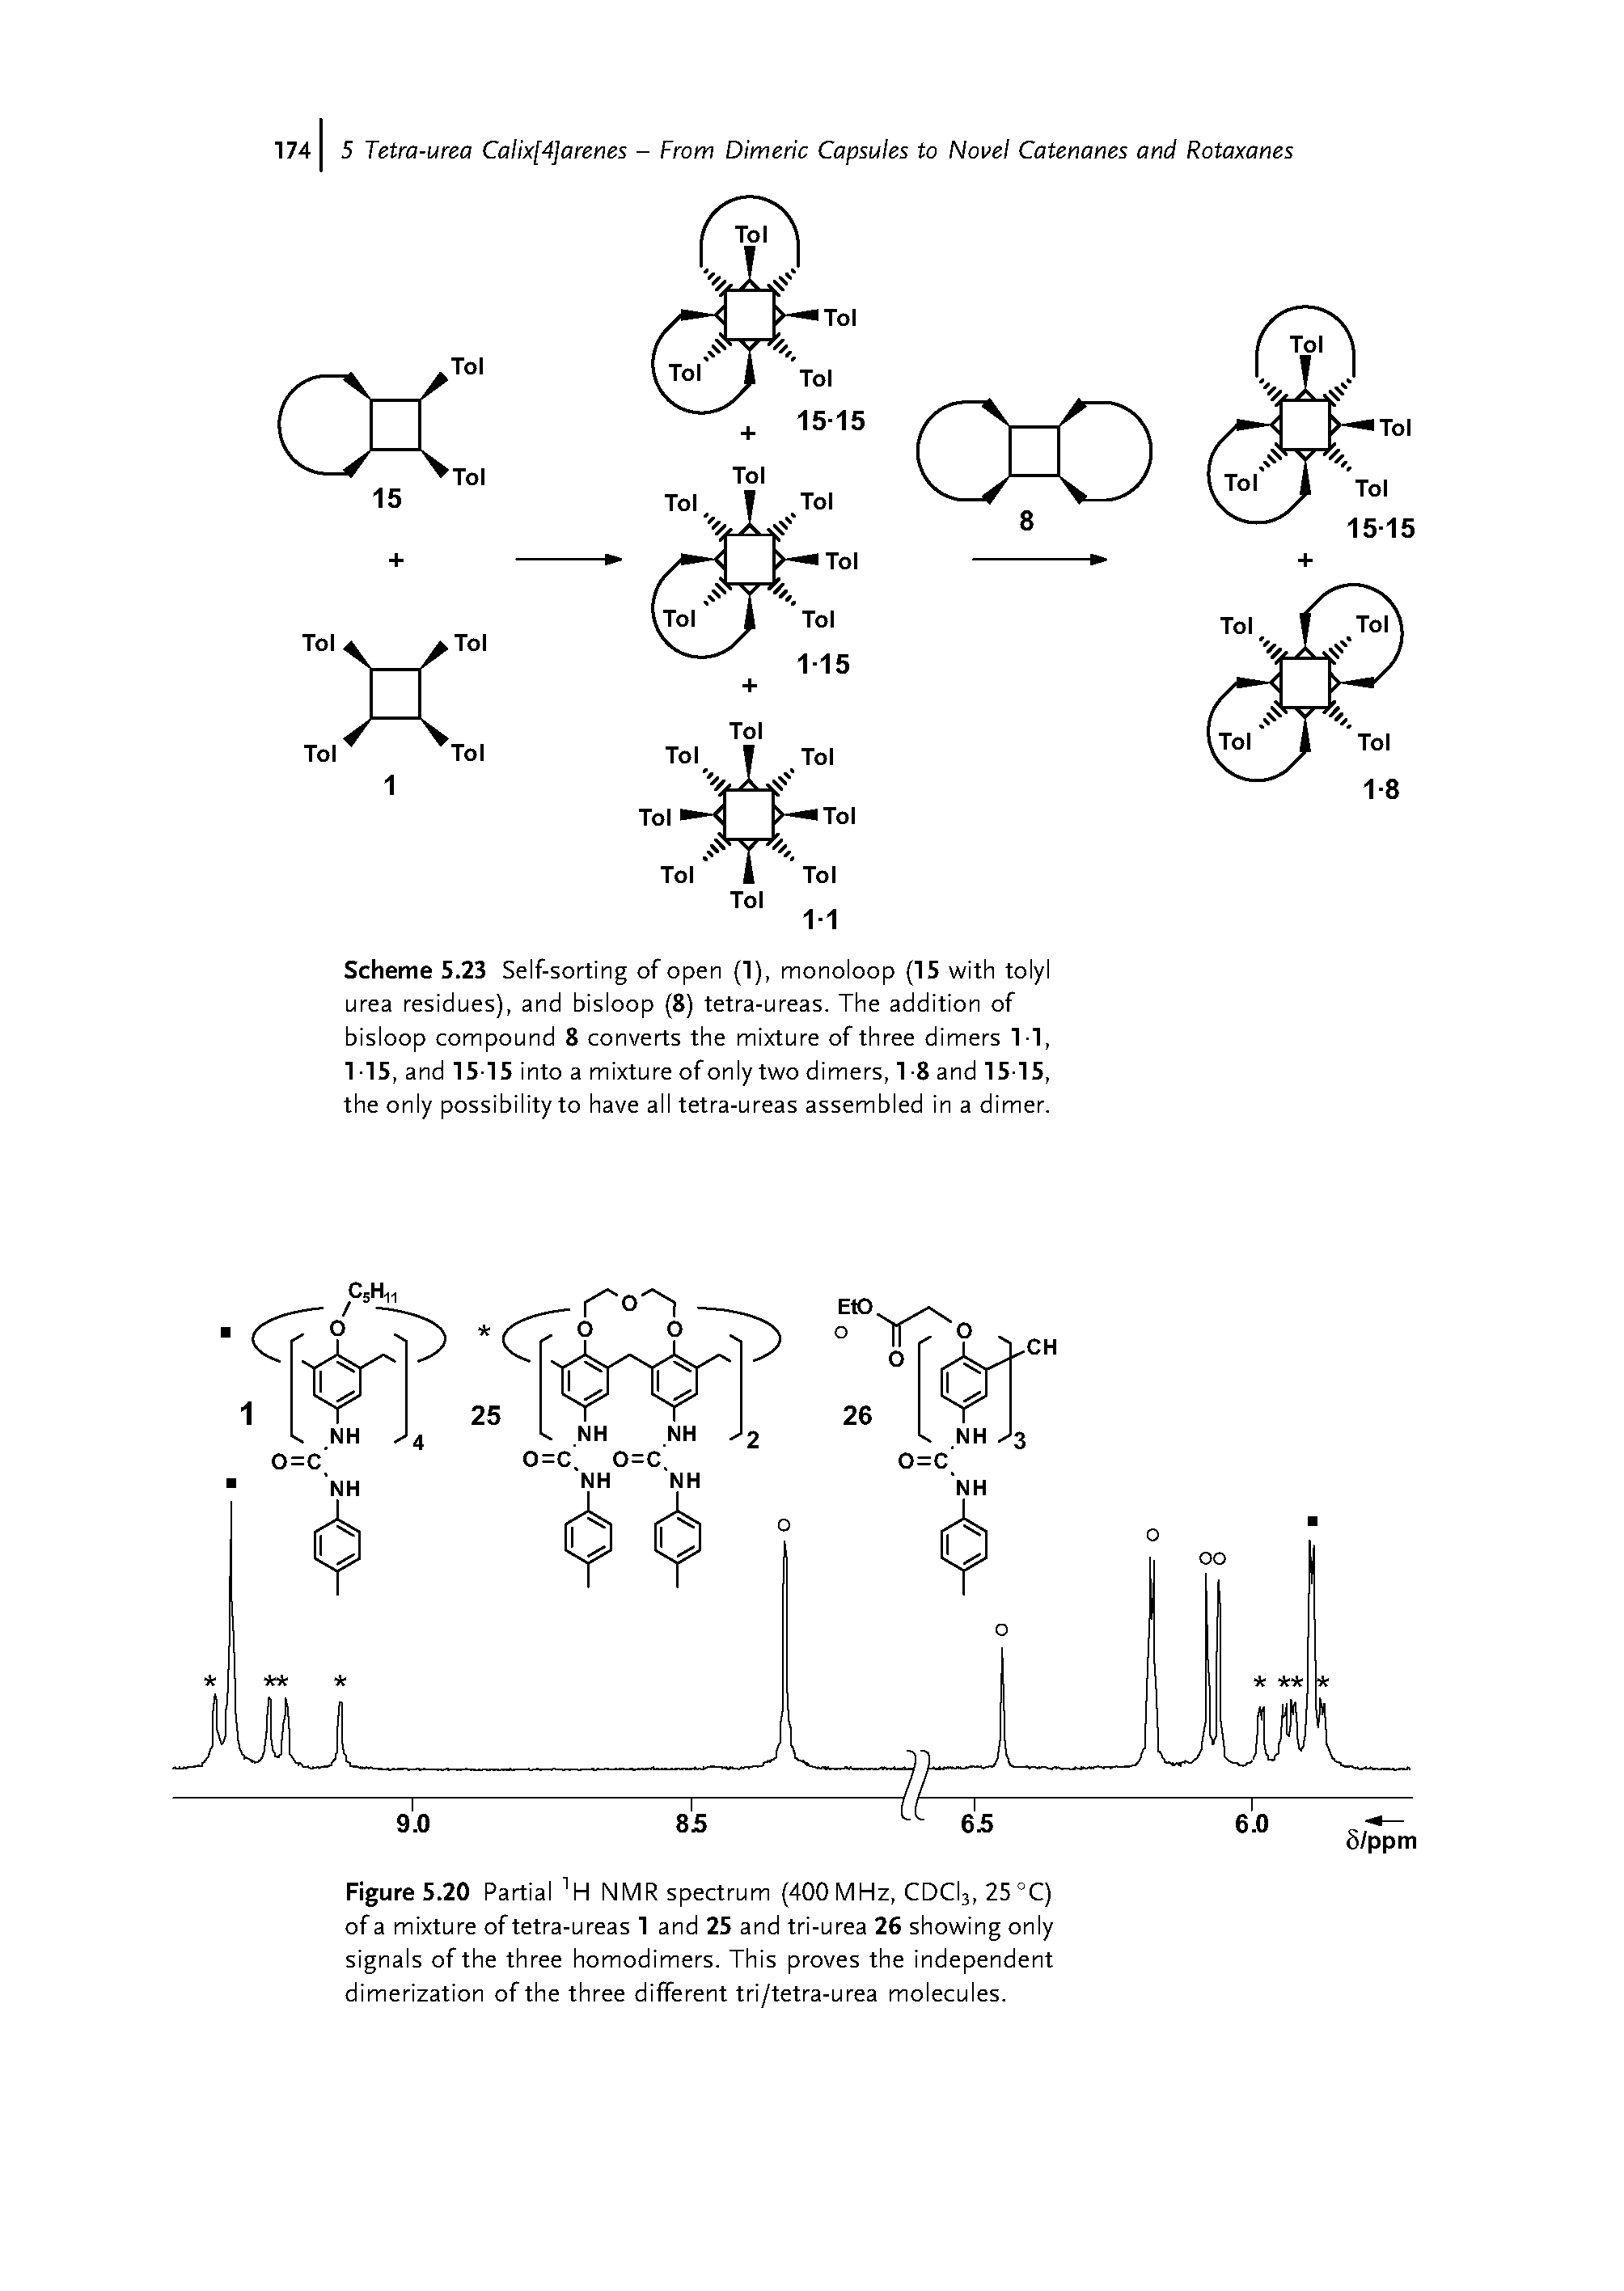 Scheme 5.23 Self-sorting of open (1), monoloop (15 with tolyl urea residues), and bisloop (8) tetra-ureas. The addition of bisloop compound 8 converts the mixture of three dimers 1-1, 1-15, and 15-15 into a mixture of only two dimers, 1 -8 and 15-15, the only possibility to have all tetra-ureas assembled in a dimer.